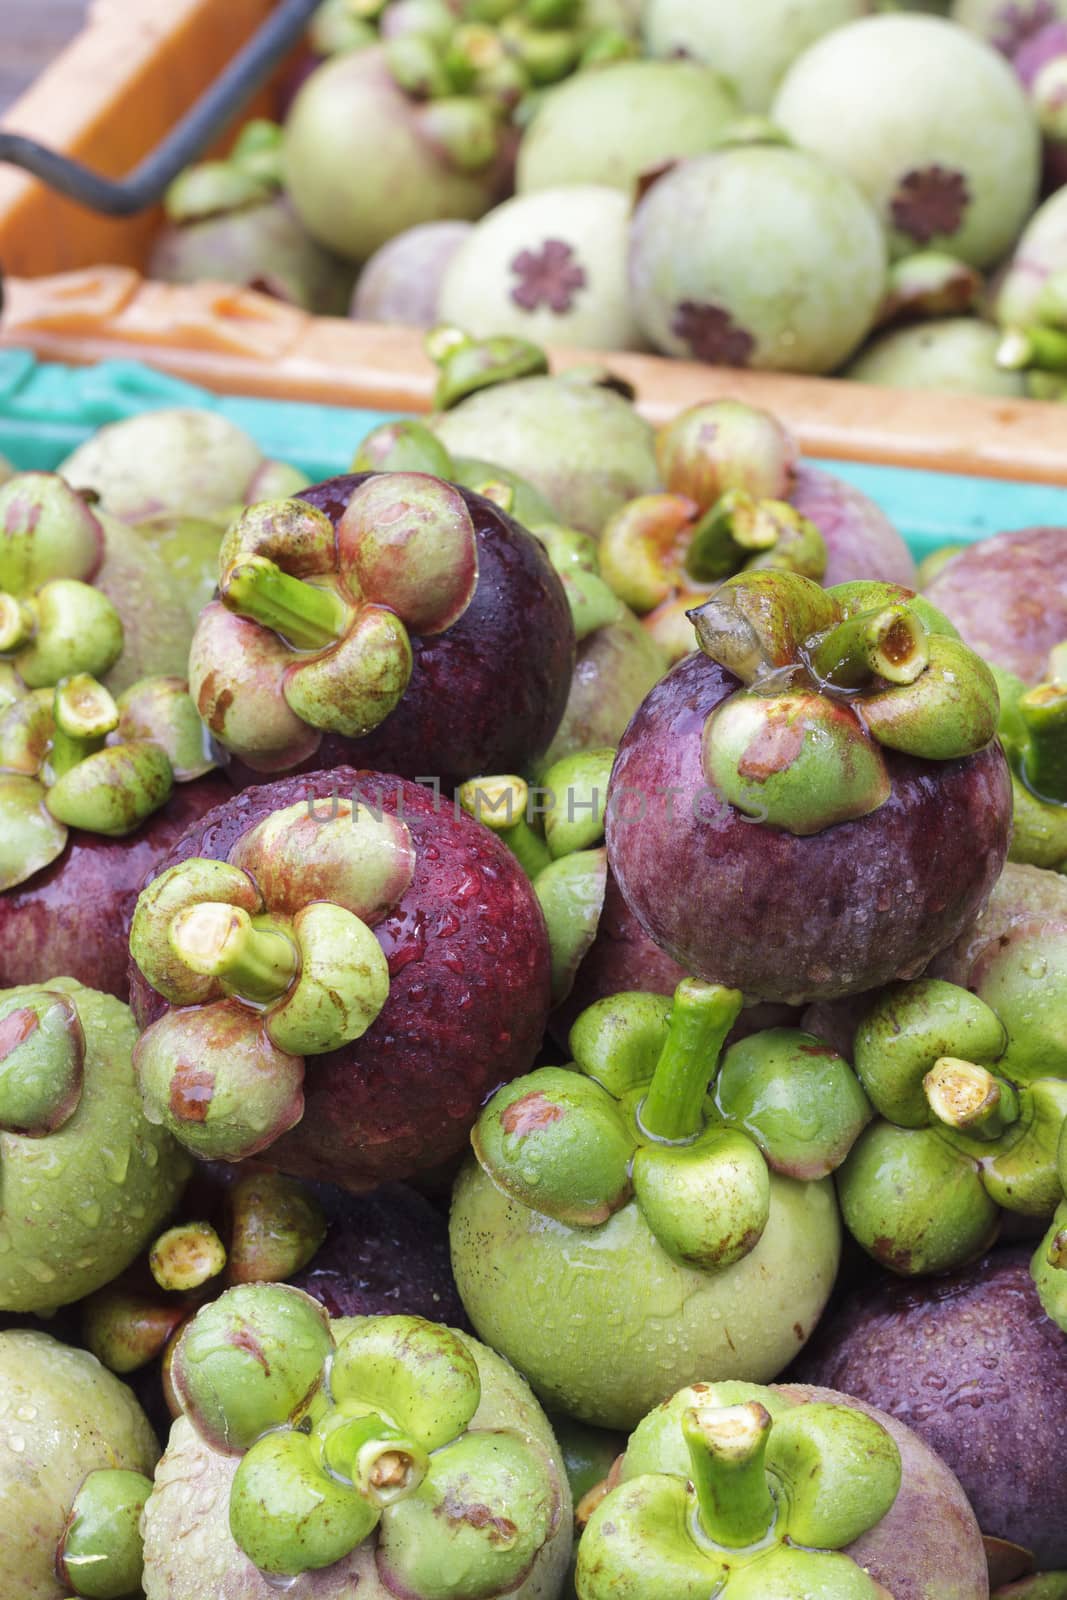 Fresh organic mangosteen after harvest from orchard go to te market.